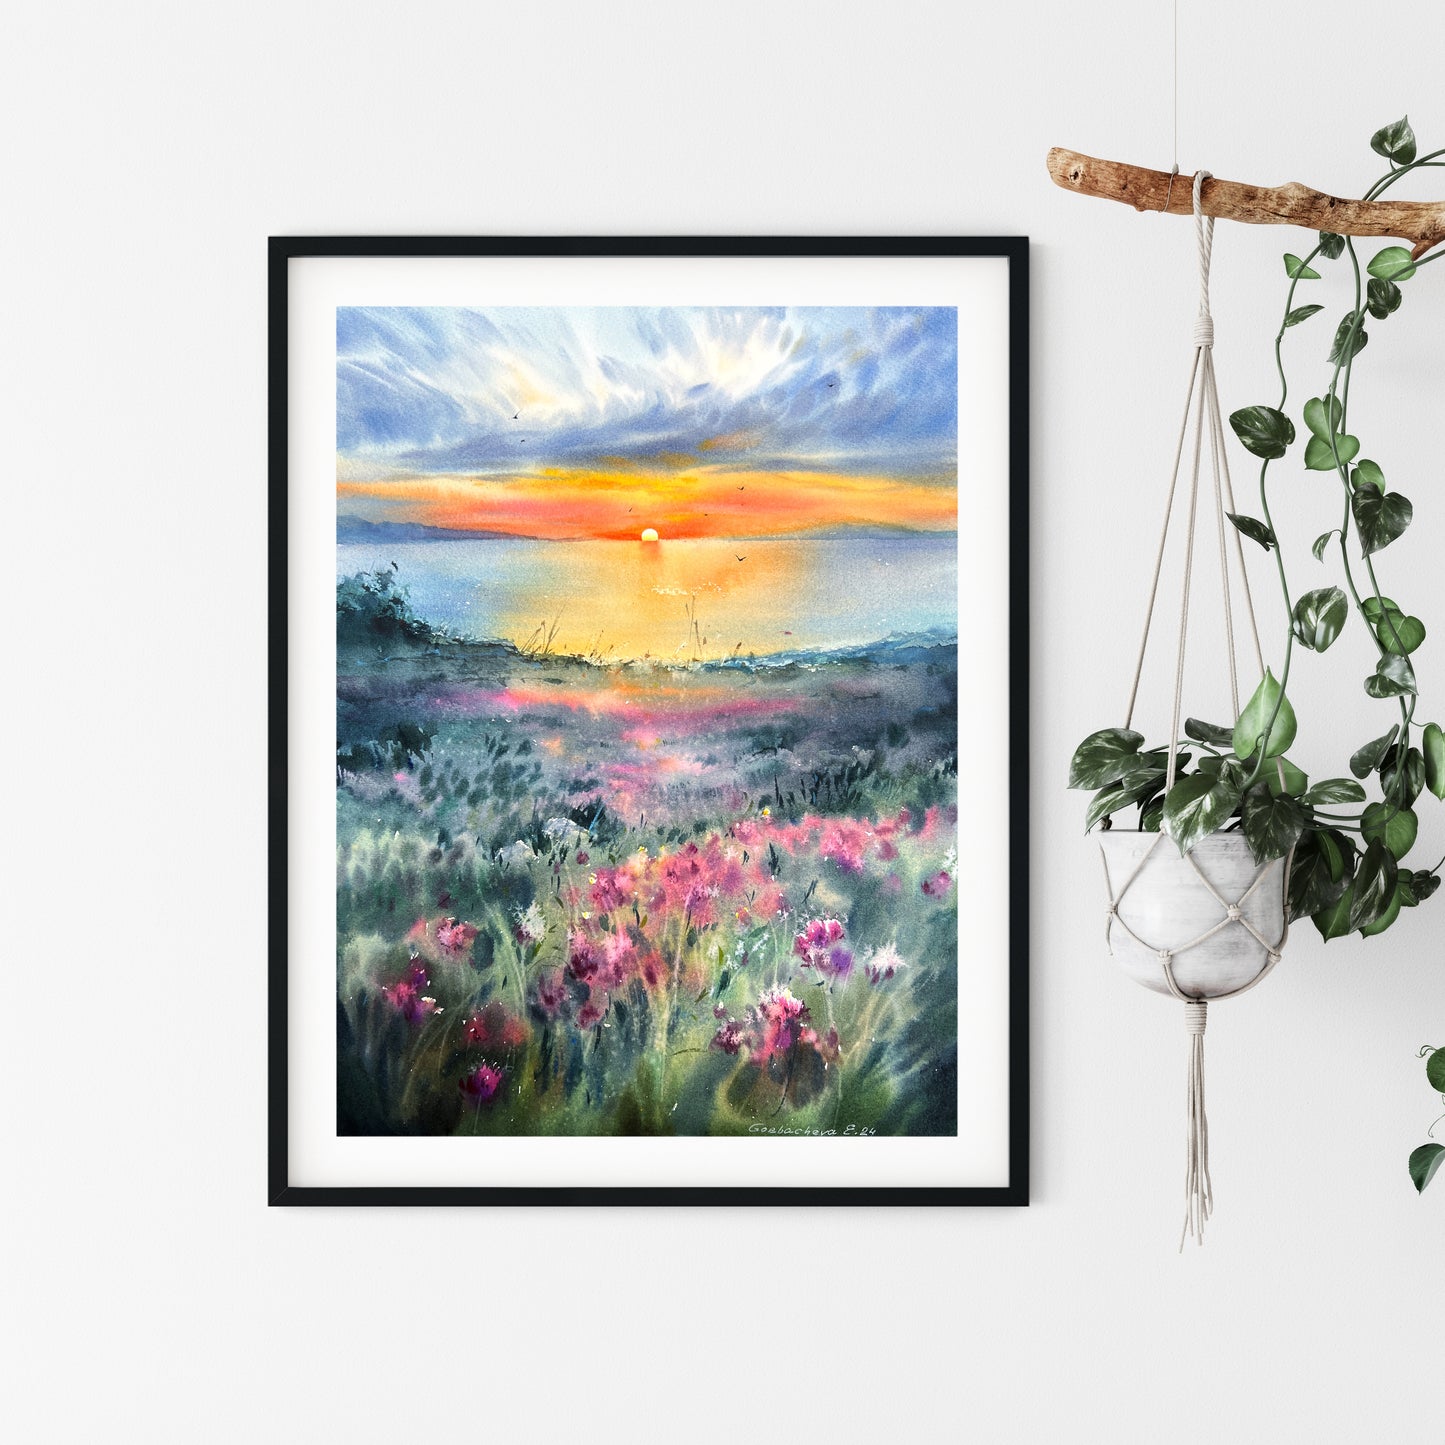 Original Watercolor Painting: Flowers and Sea at Sunset with Clover Field Art